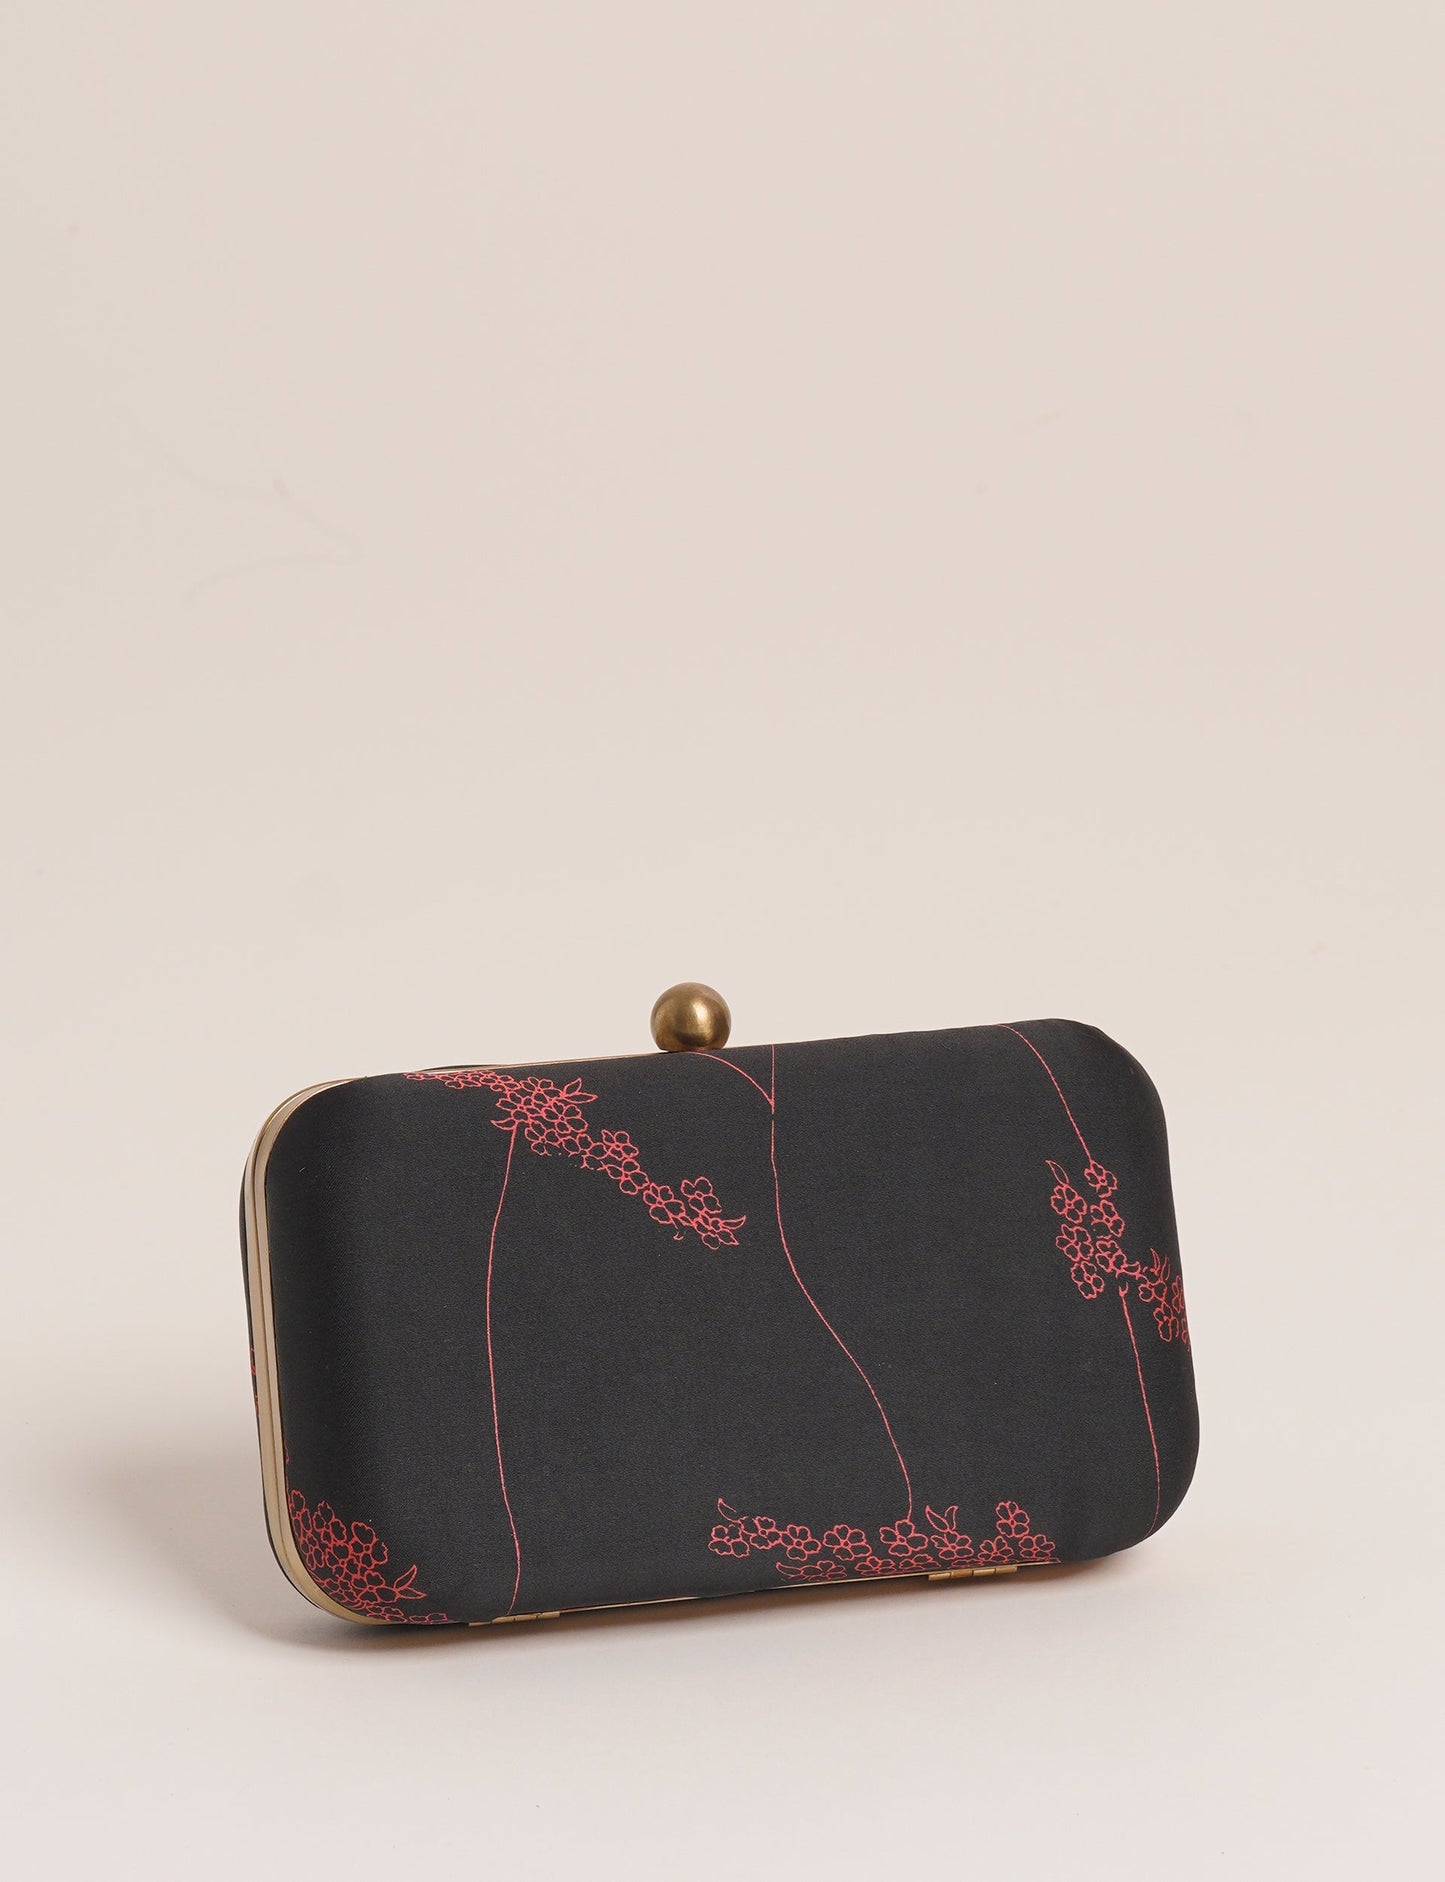 Stylish CLUTCH HANDBAG, a perfect companion for your evening look. Firm rectangular frame, optional metallic sling, and stunning prints add color to your outfit. Eco-friendly and ethically crafted for sustainable fashion.